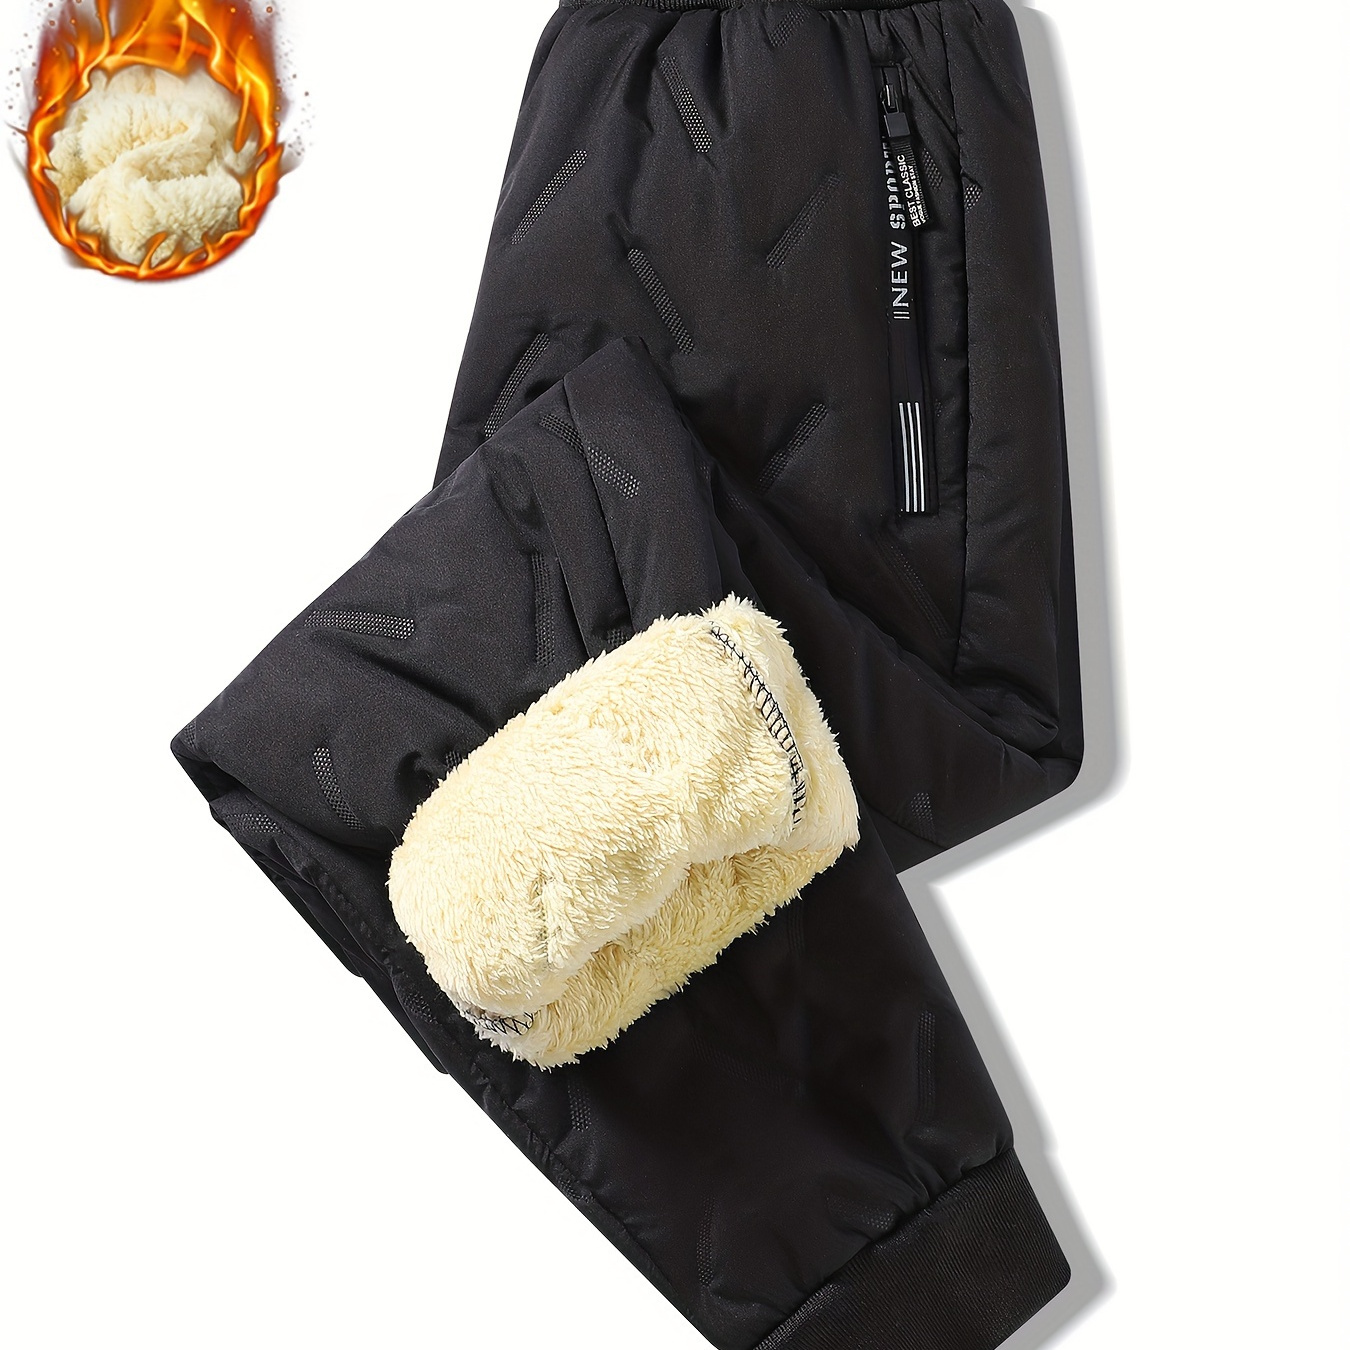 

Boys Thermal Fleece-lined Casual Pants, Stylish Athletic Sweatpants, Warm Winter Sports Trousers